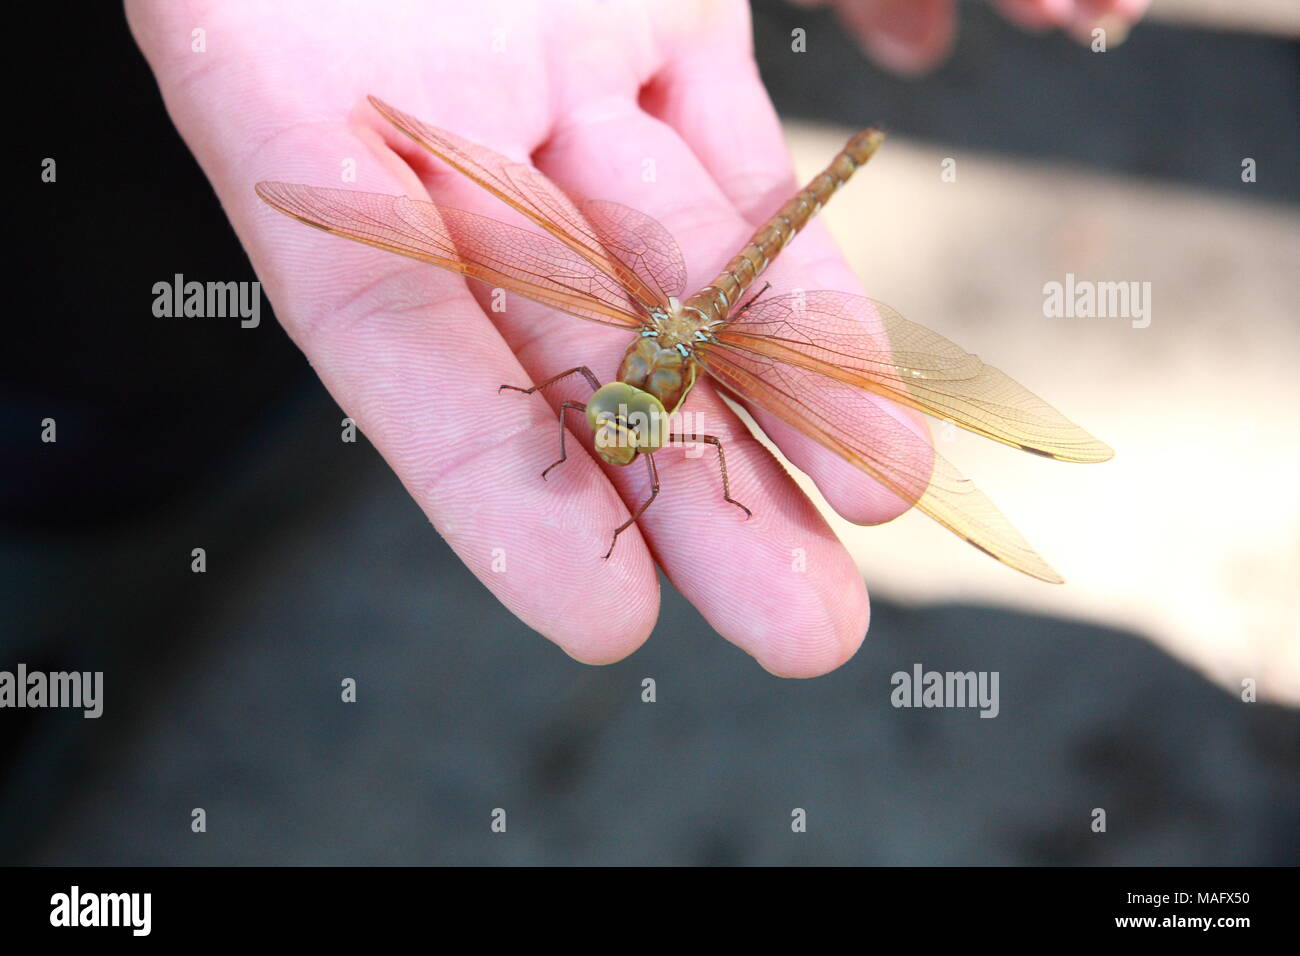 Big dragonfly close up on a person's hand. Stock Photo